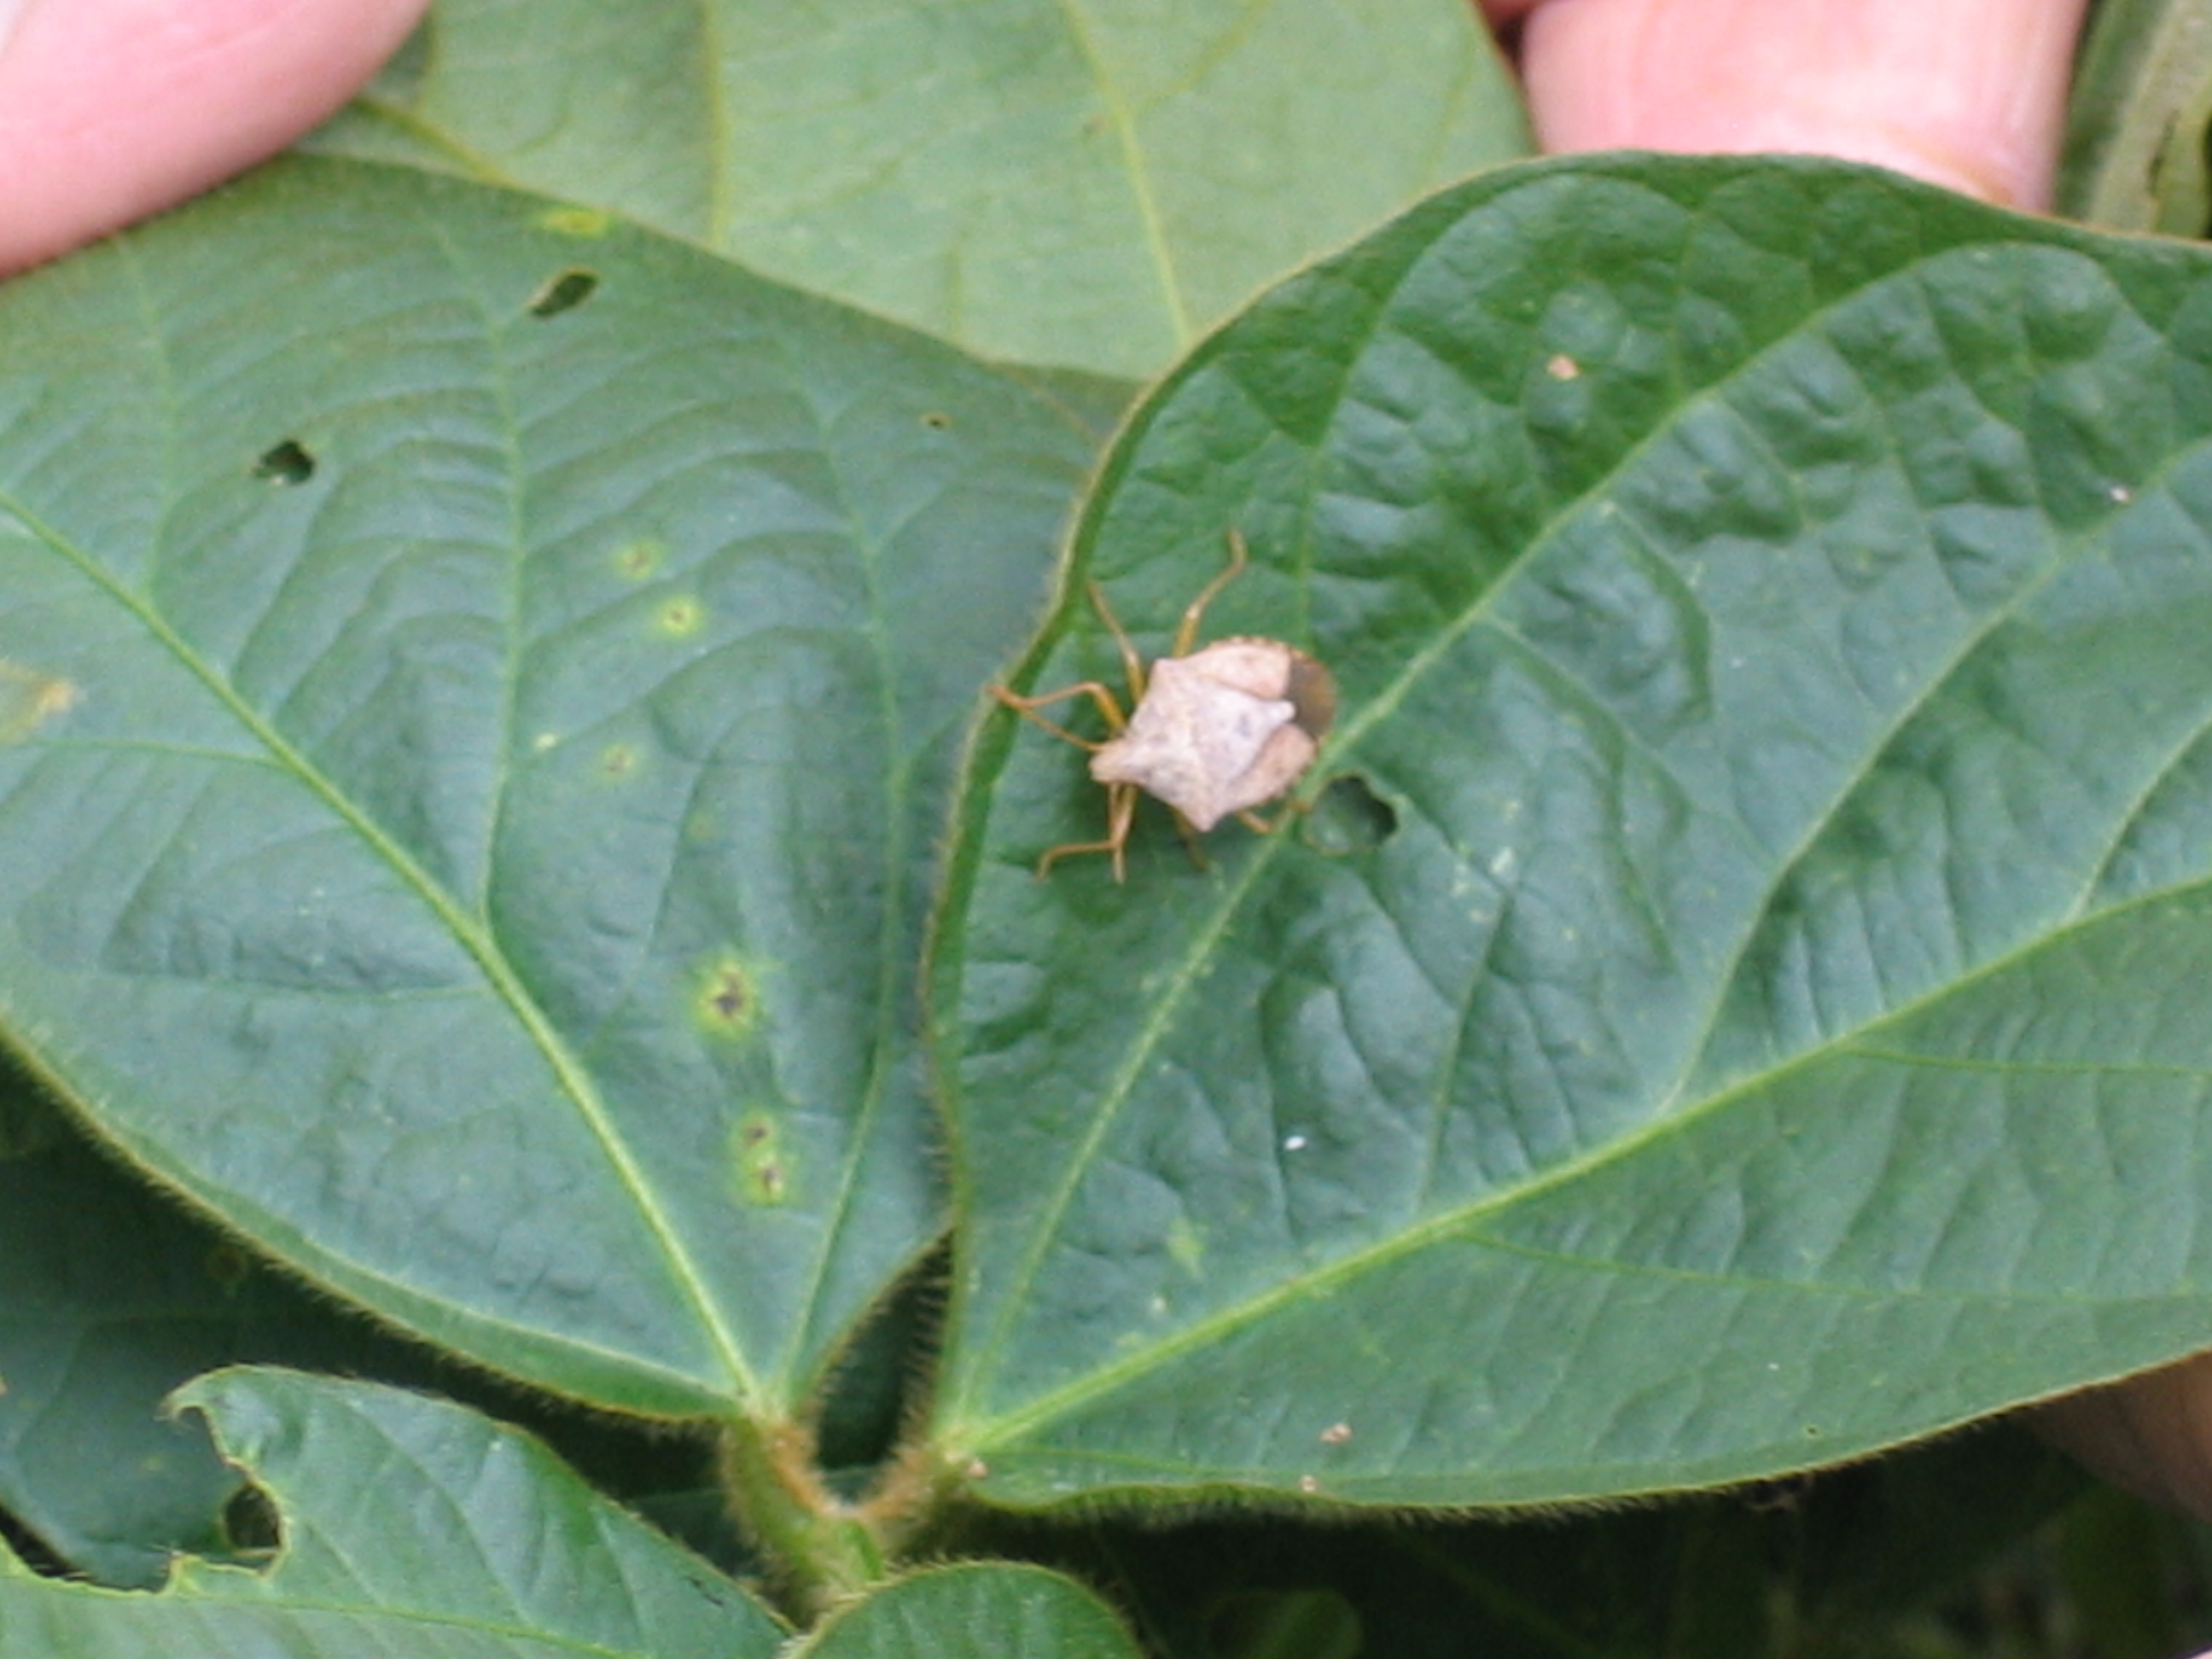 Agronomic image showing a stink bug on a soybean leaf.